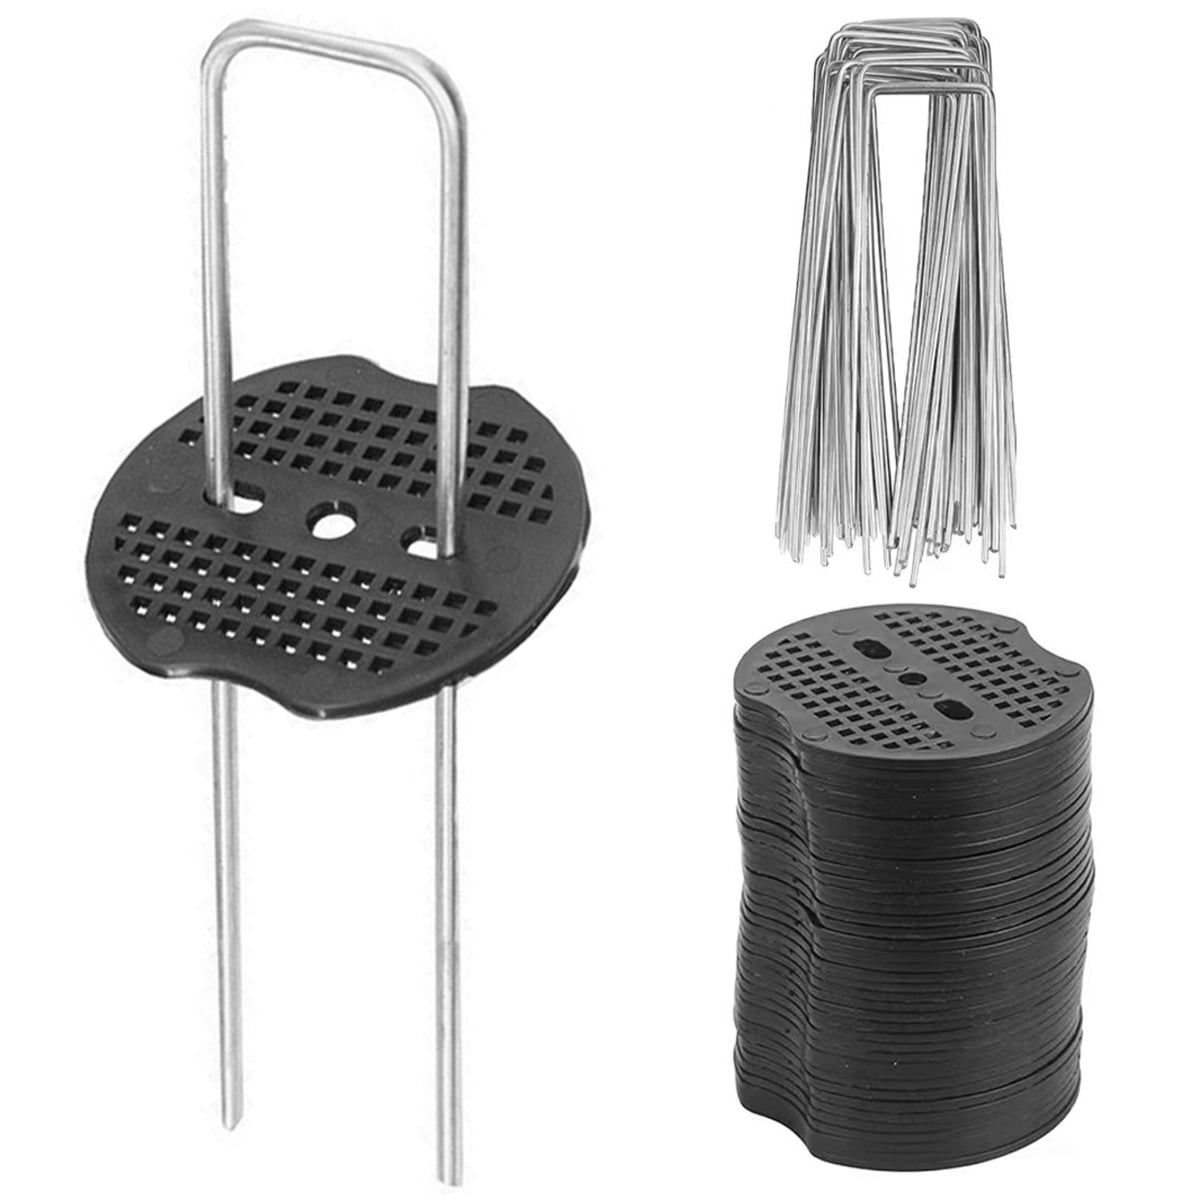 Pack of 120 x Metal Ground Garden Pegs Camping Pins Hooks Staples Tent Fabric 